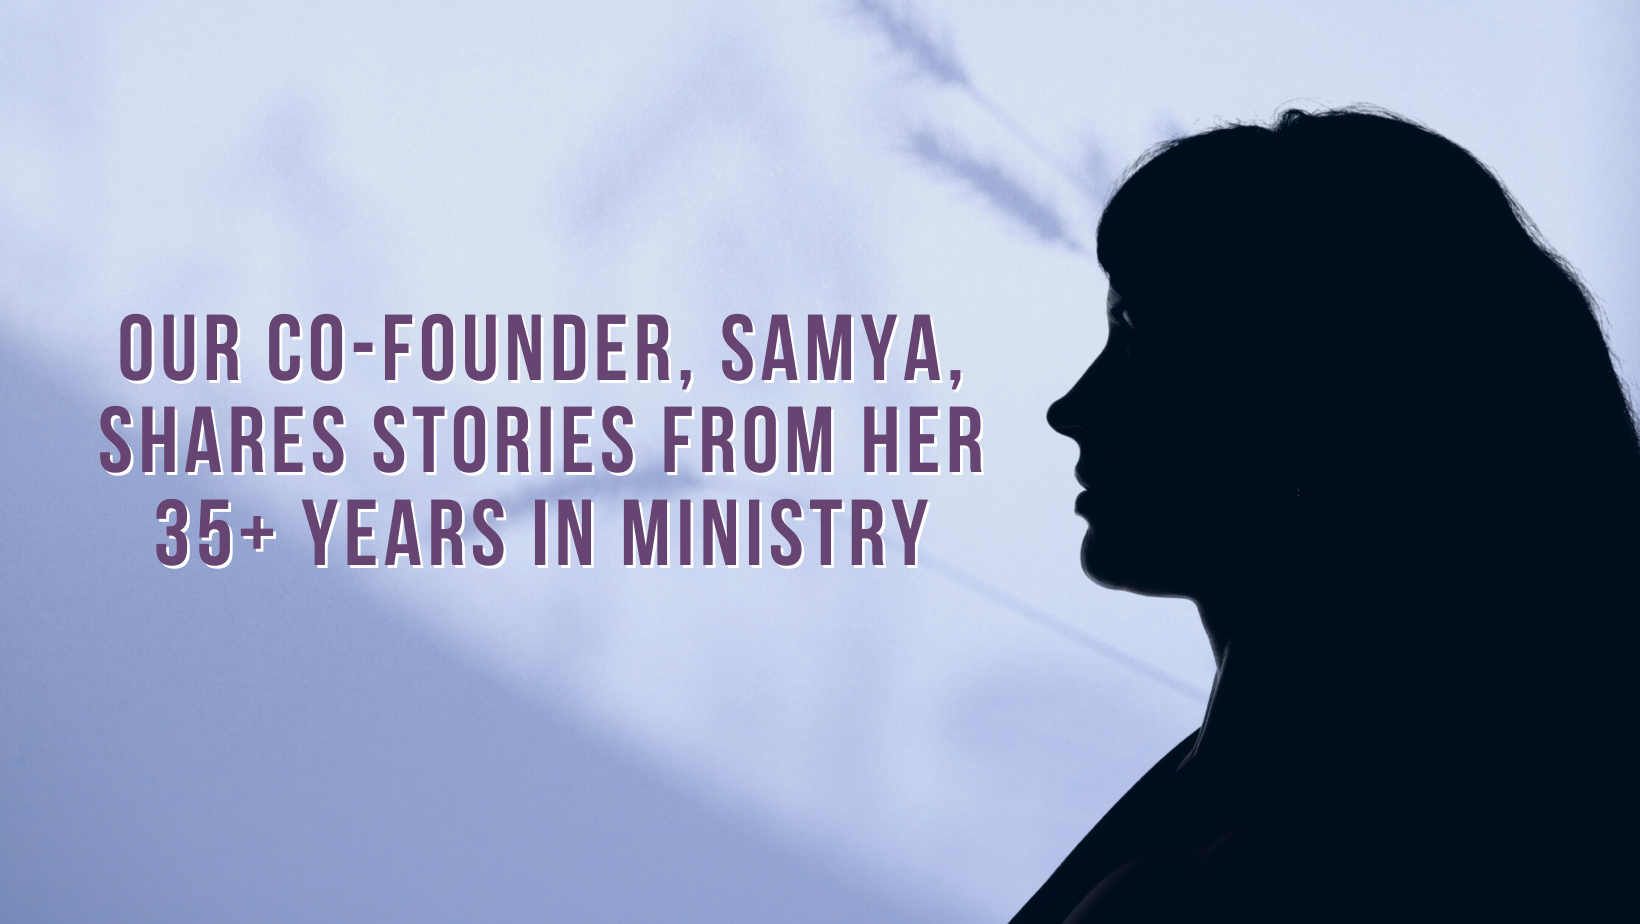 Our co-founder, Samya, shares stories from her 35+ years in ministry